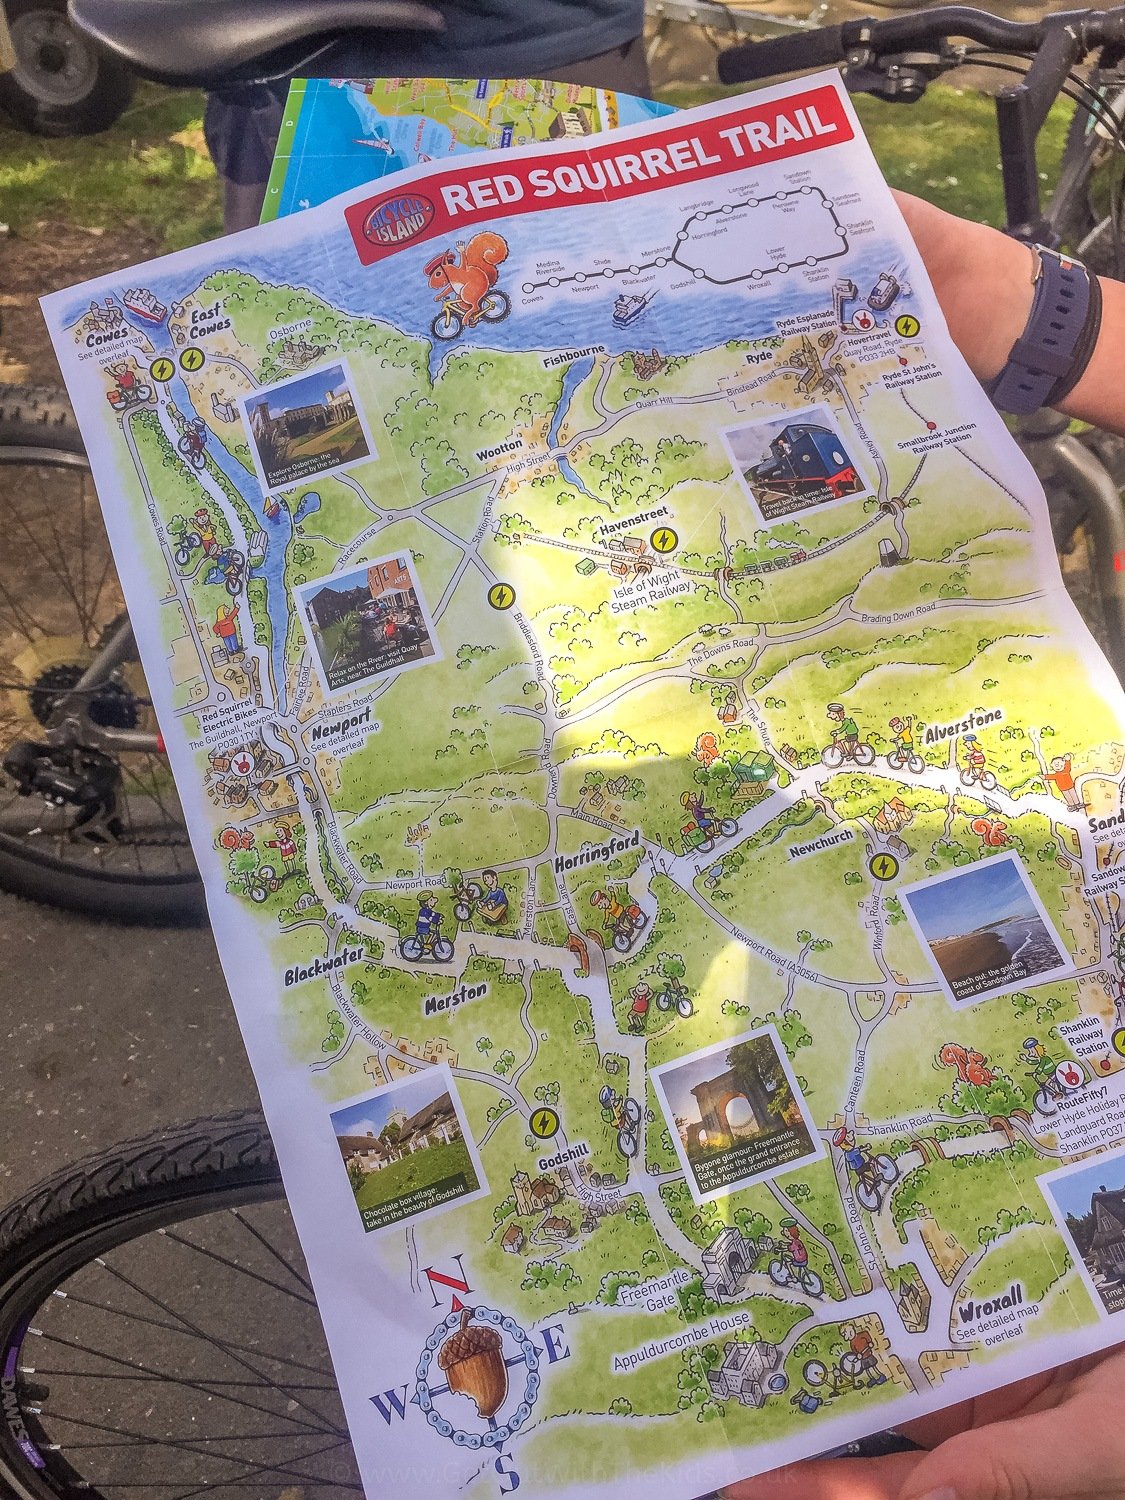 The Red Squirrel Trail Map